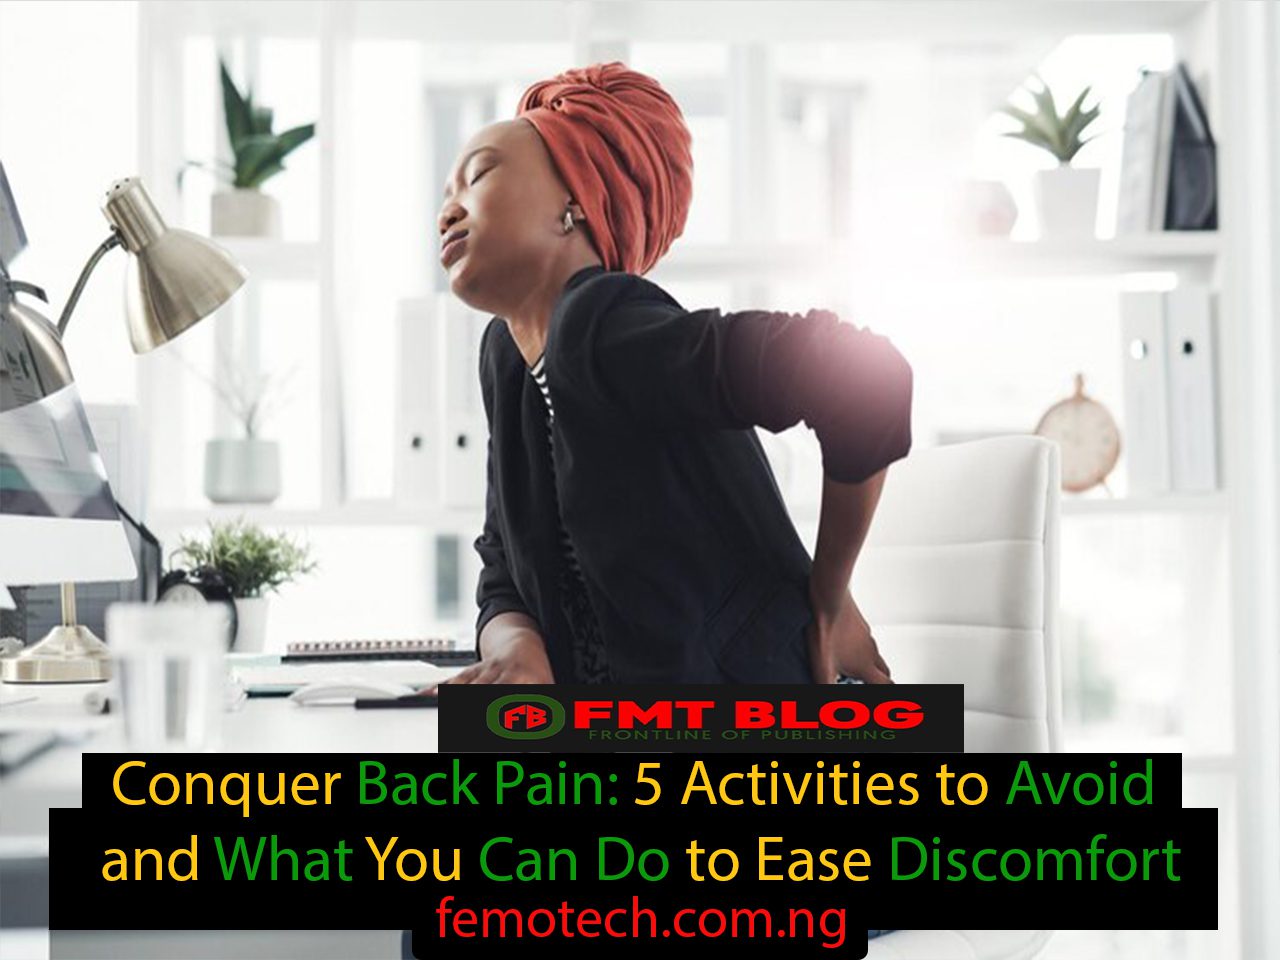 Conquer Back Pain: 5 Activities to Avoid and What You Can Do to Ease Discomfort